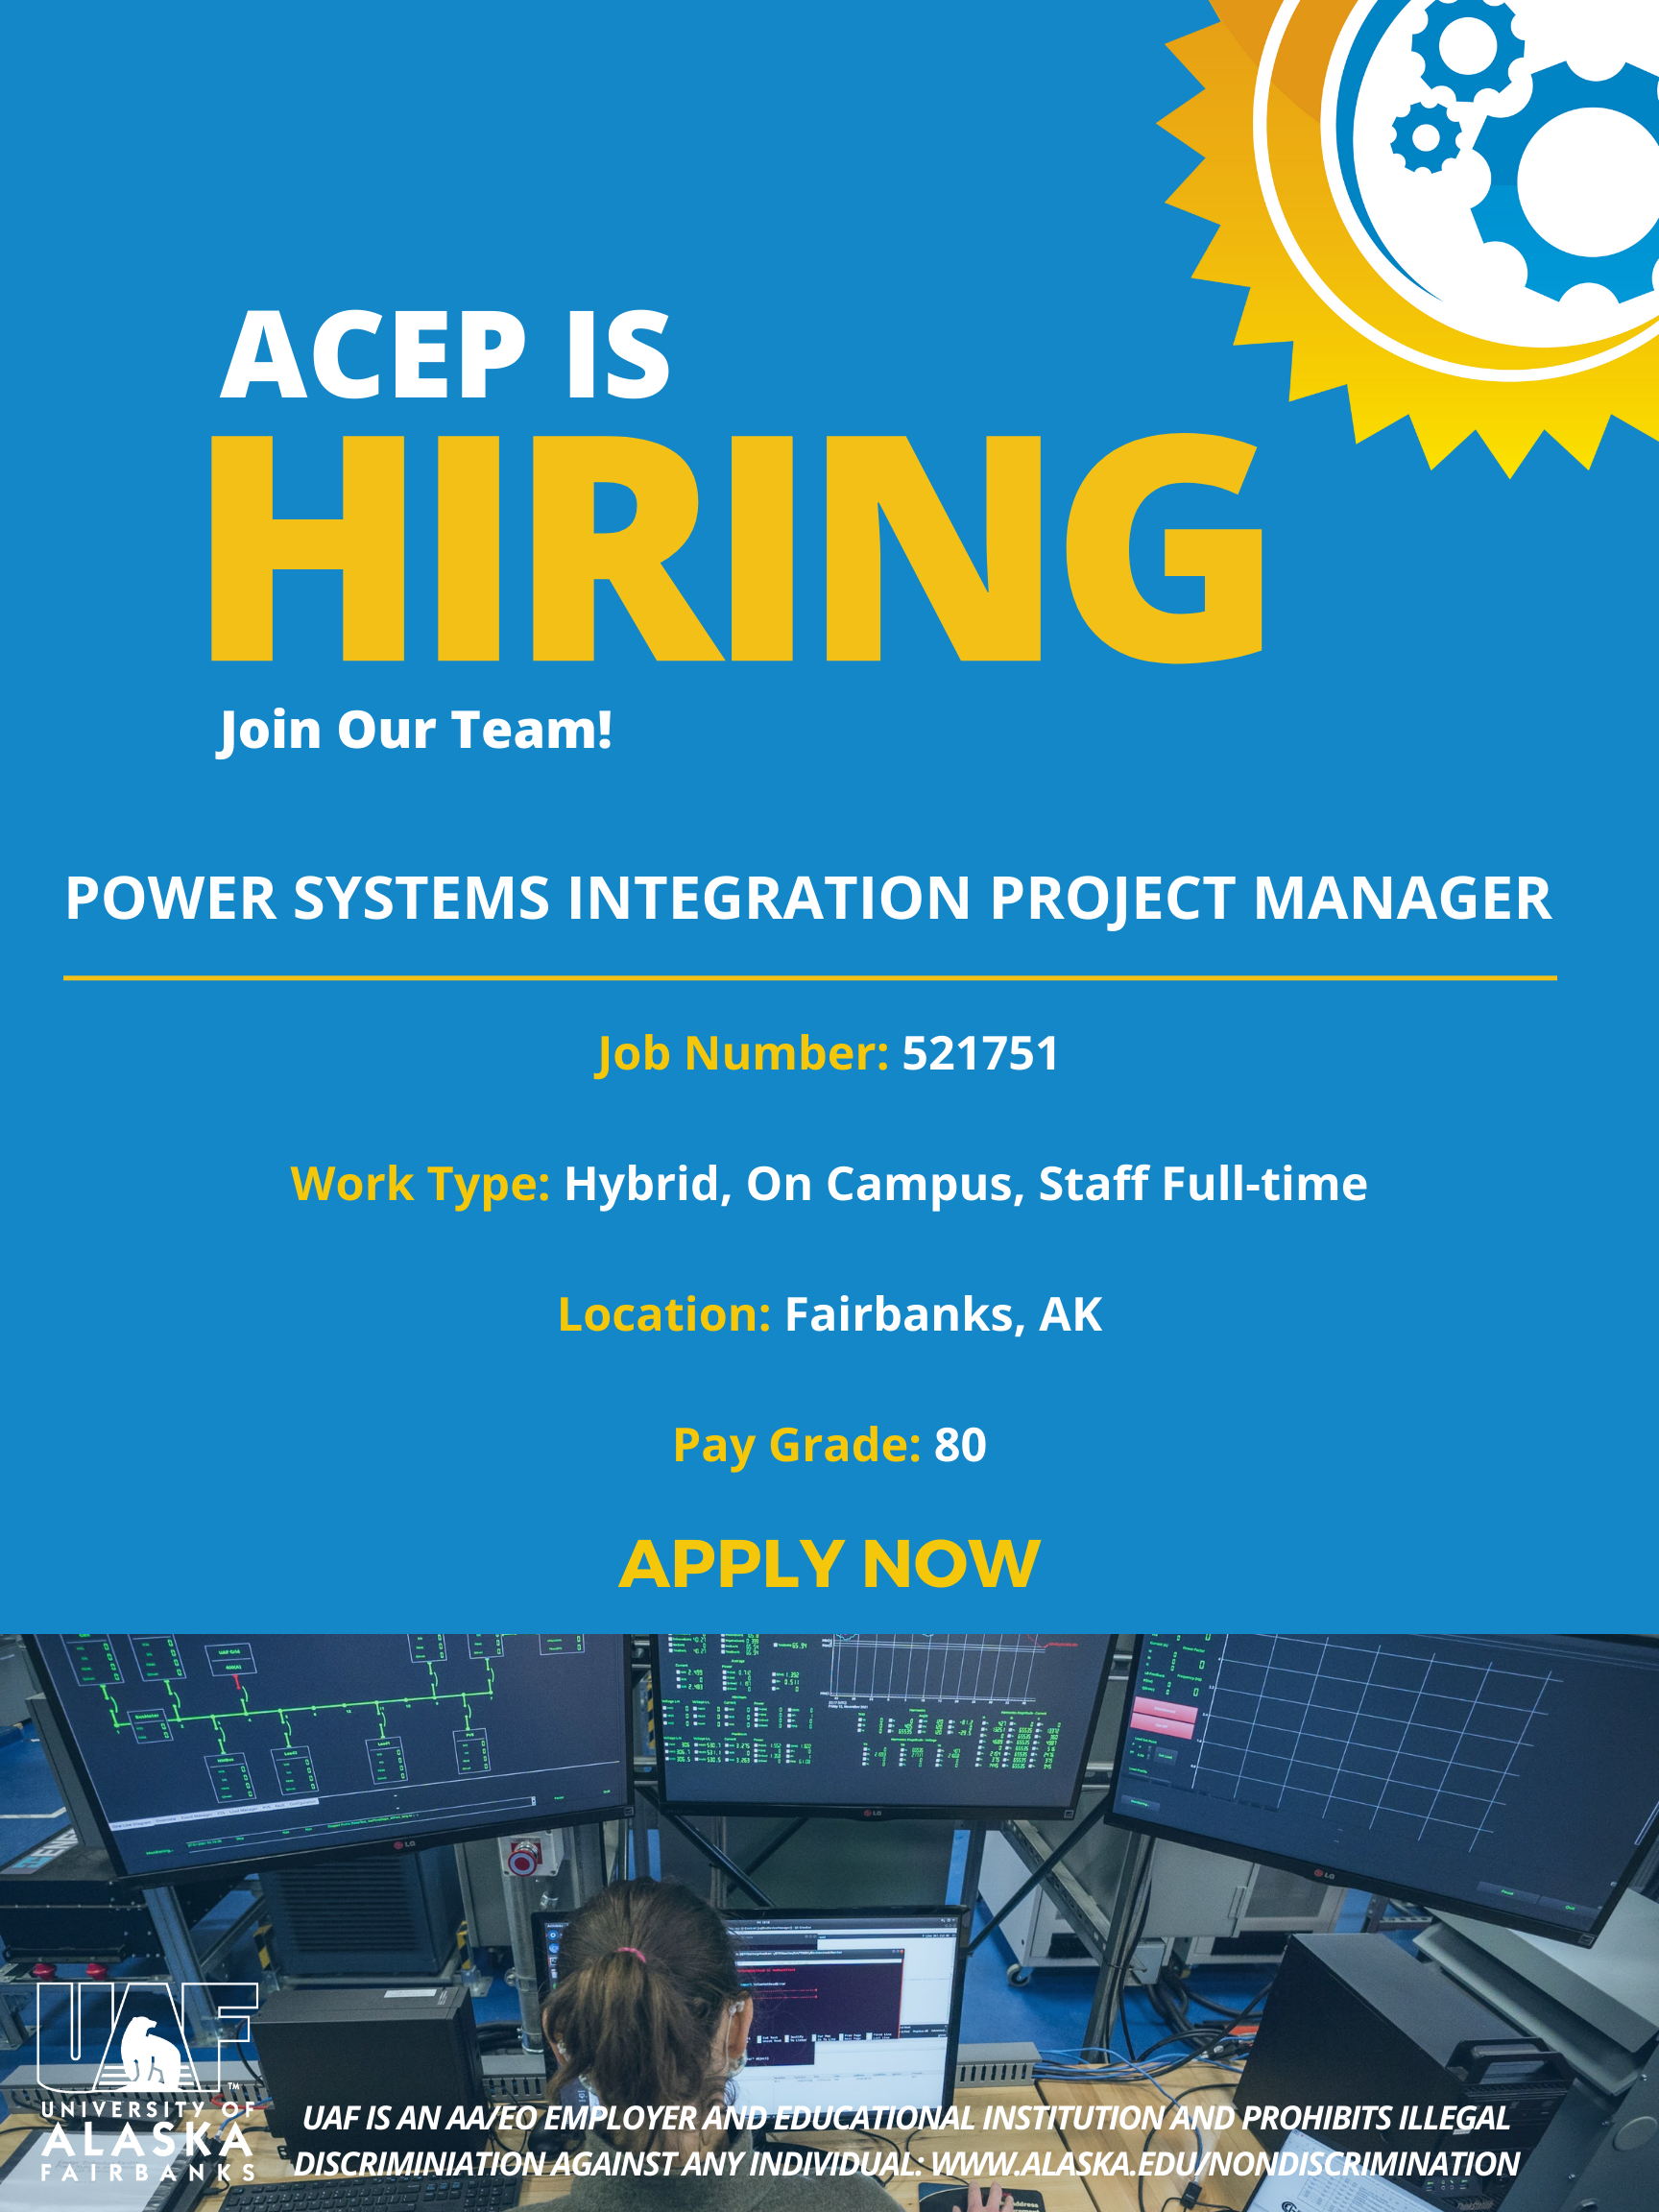 ACEP is Hiring! Power Systems Integration Project Manager